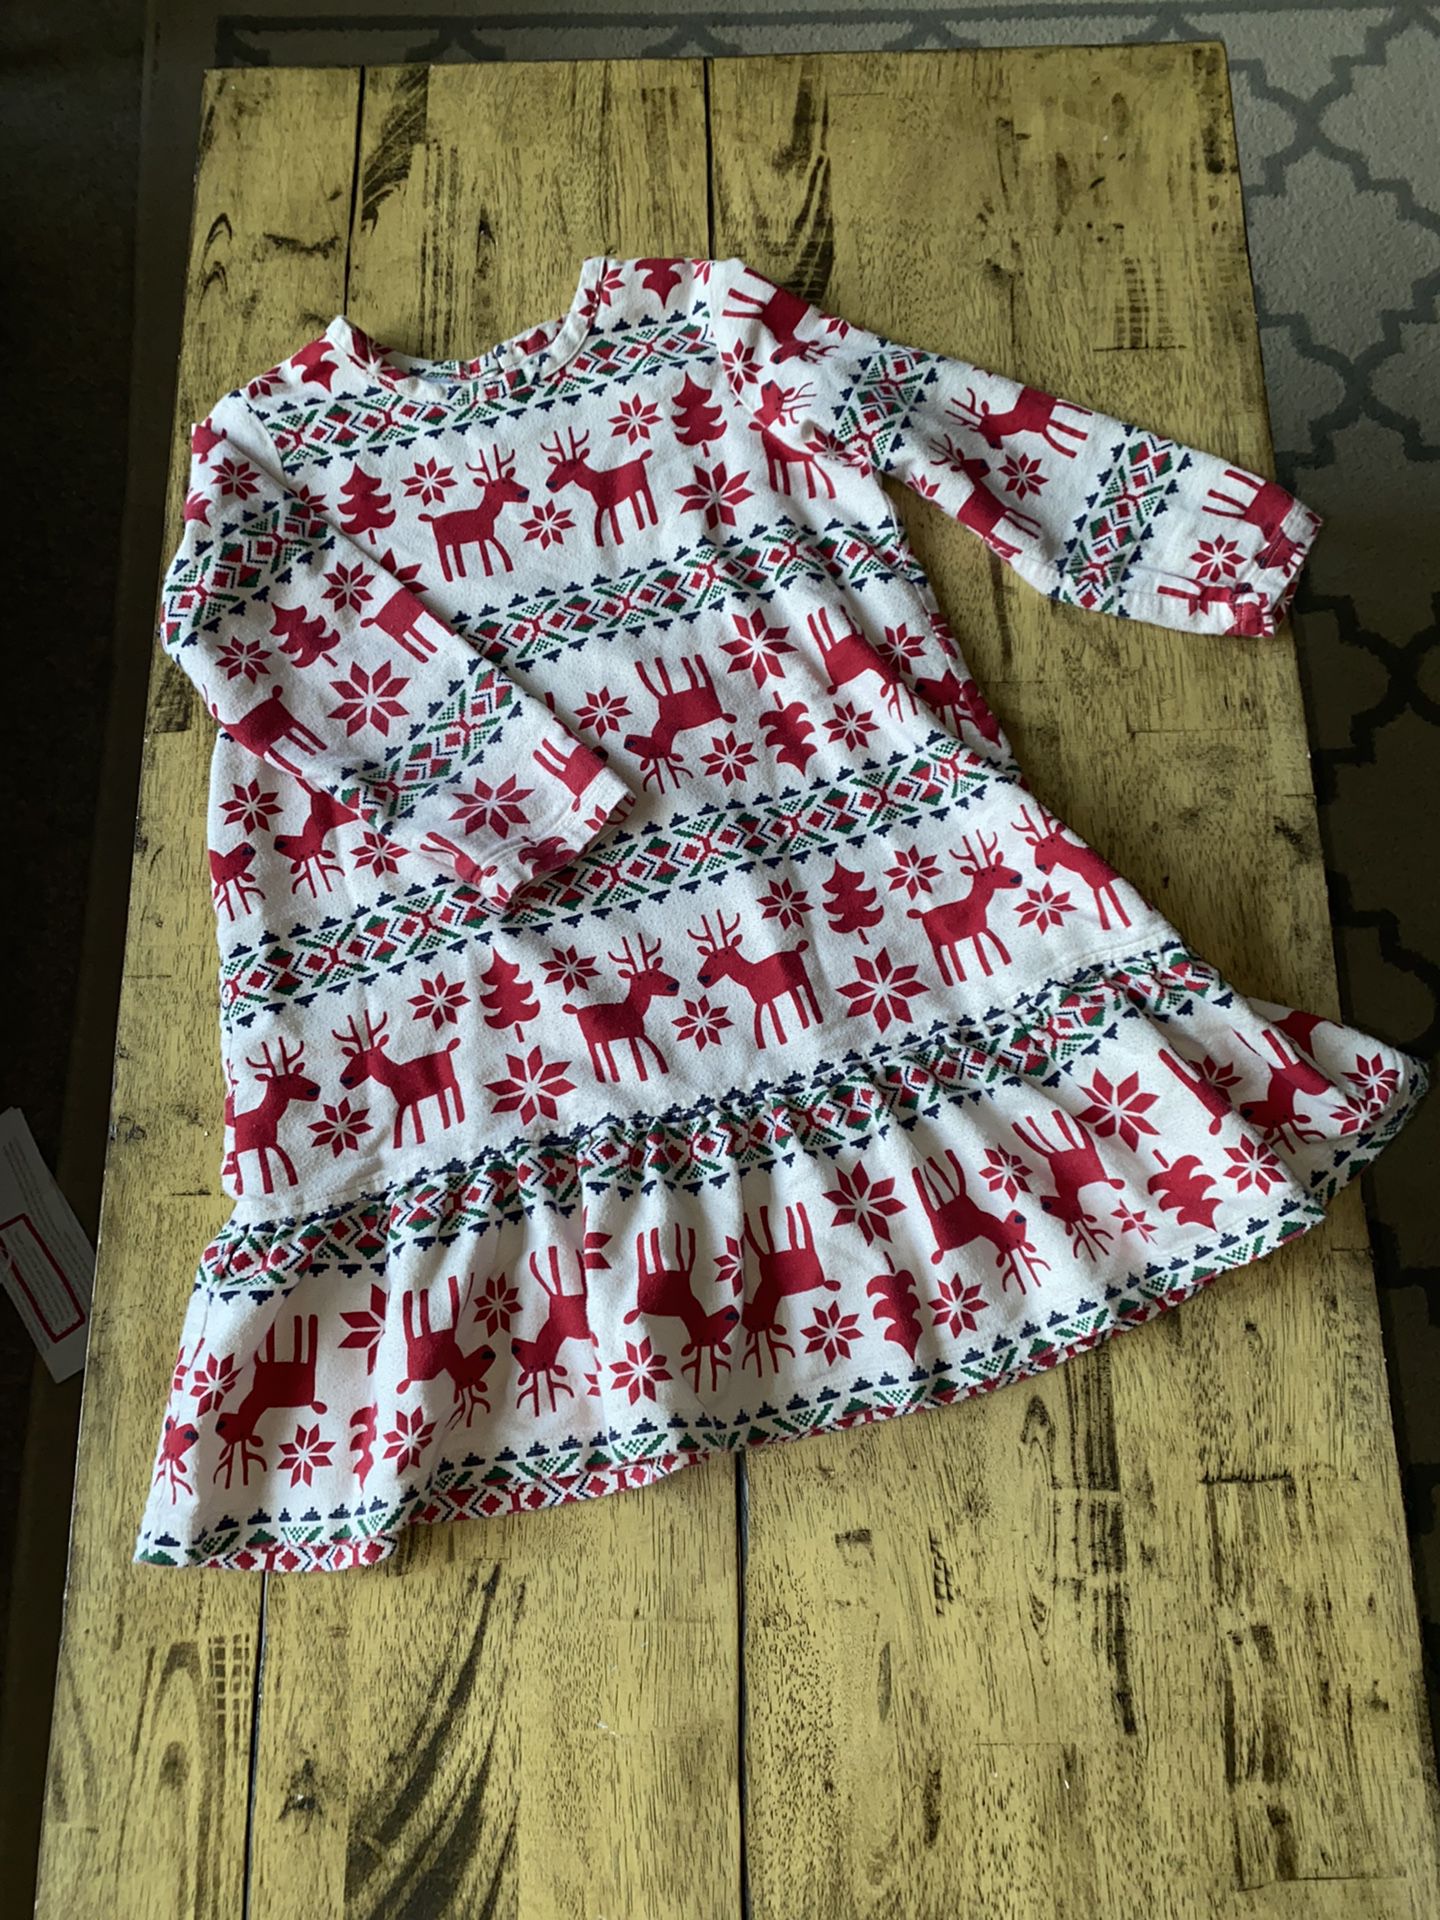 Girls Size 5 Hanna Anderson Holiday Nightgown and JOY Pj Set